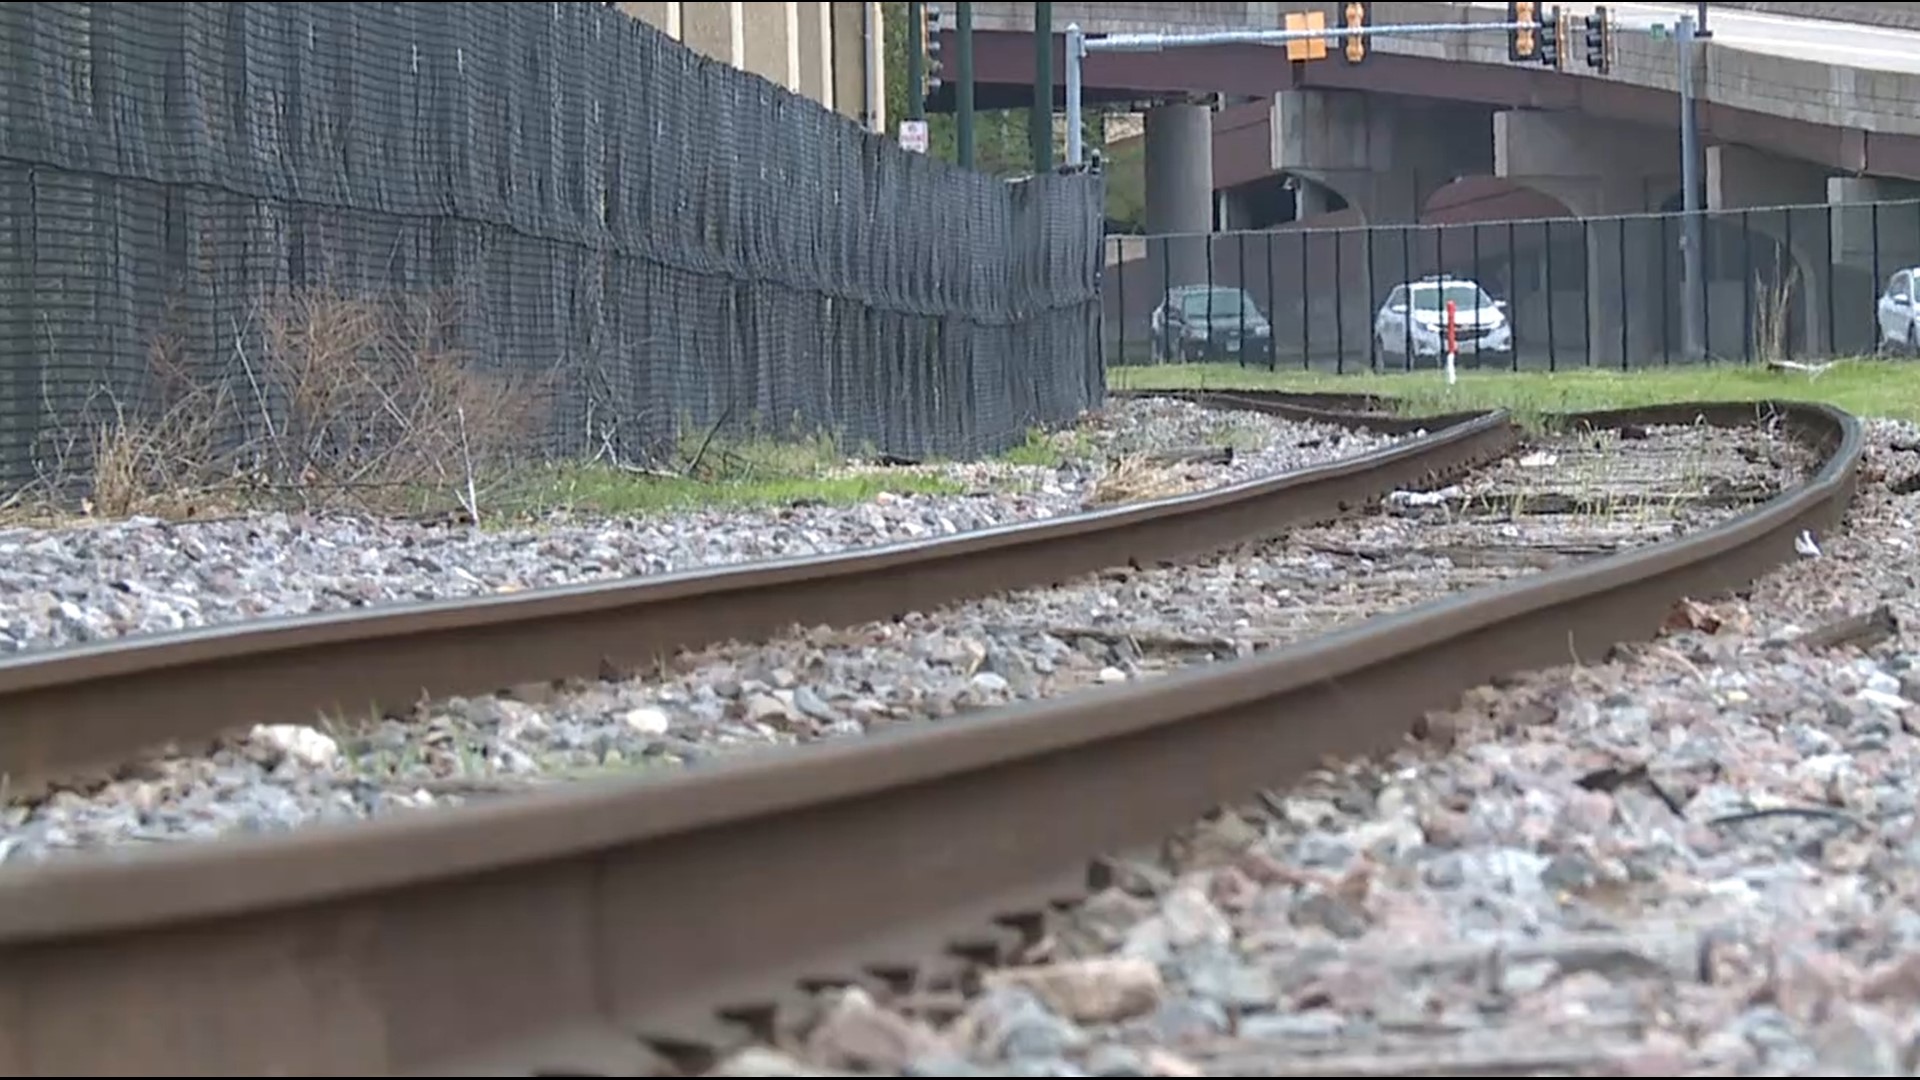 The Quad Cities Chamber wants the community to show its support for an Amtrak stop in Moline. After years of delays, leaders hope the petition will spark action.